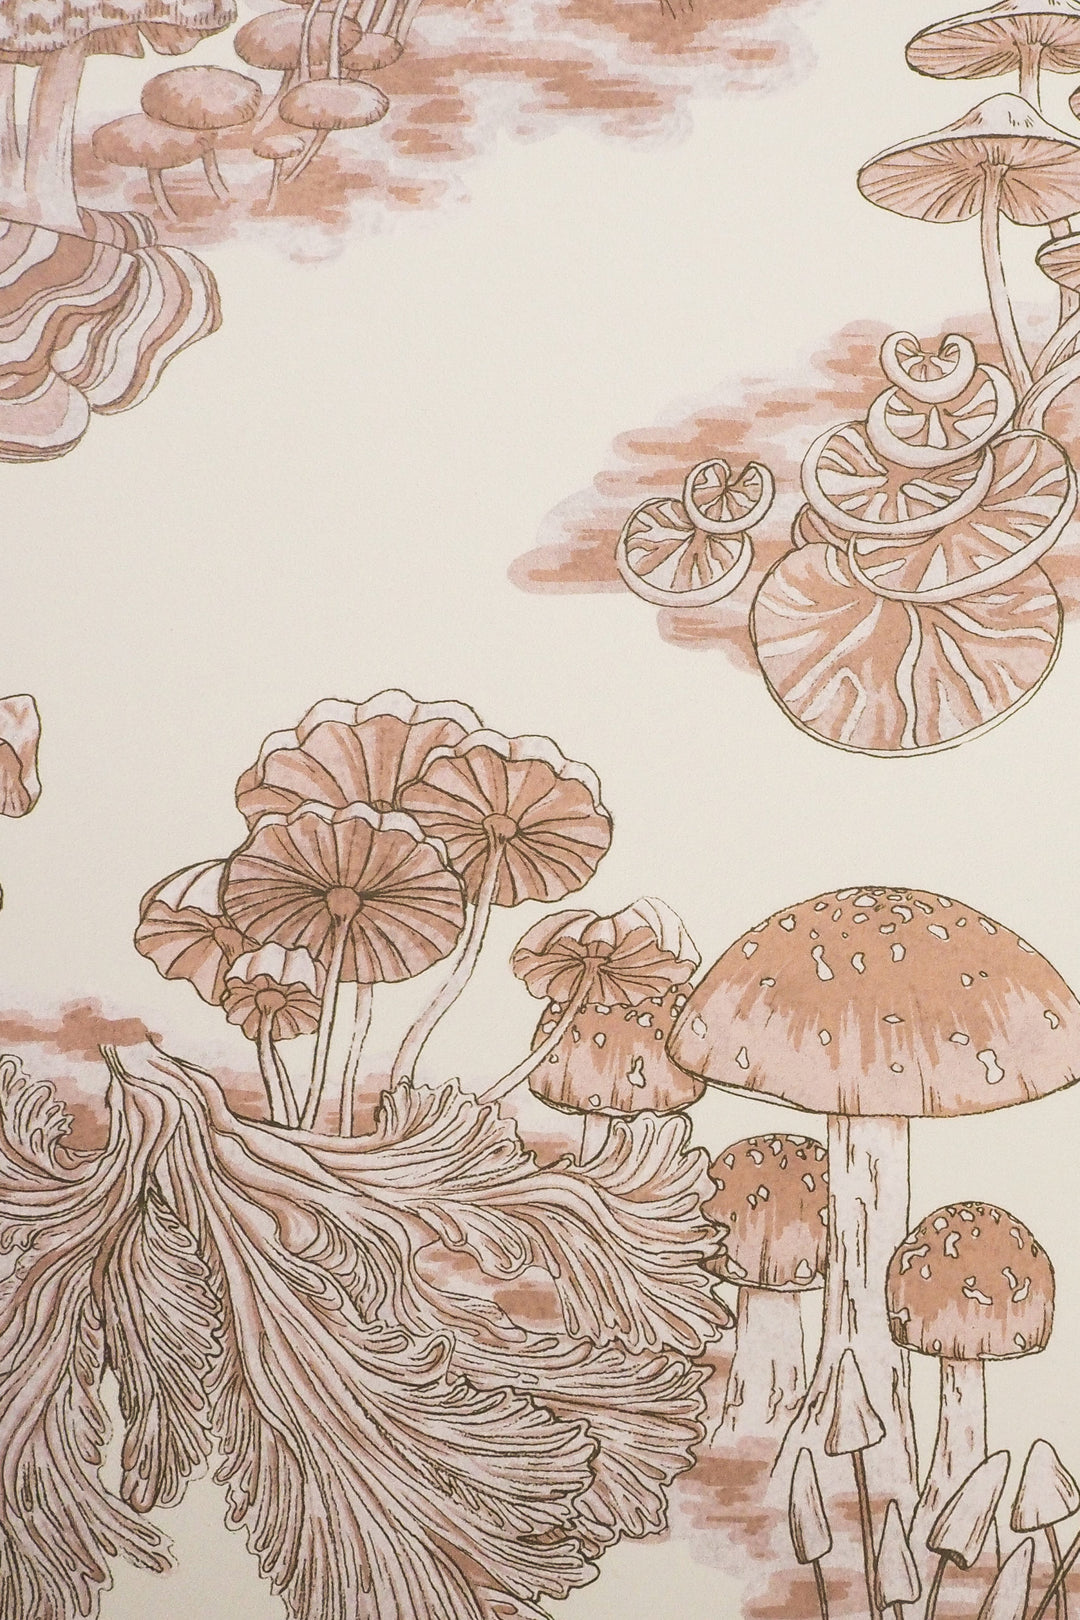 Wildmore-fungi-wallpaper-champignon-off-white-background-surreal-mushroom-tones-print-orchids-mushrooms-scattered-print-hand-painted-digital-reproduced-funky-pattern